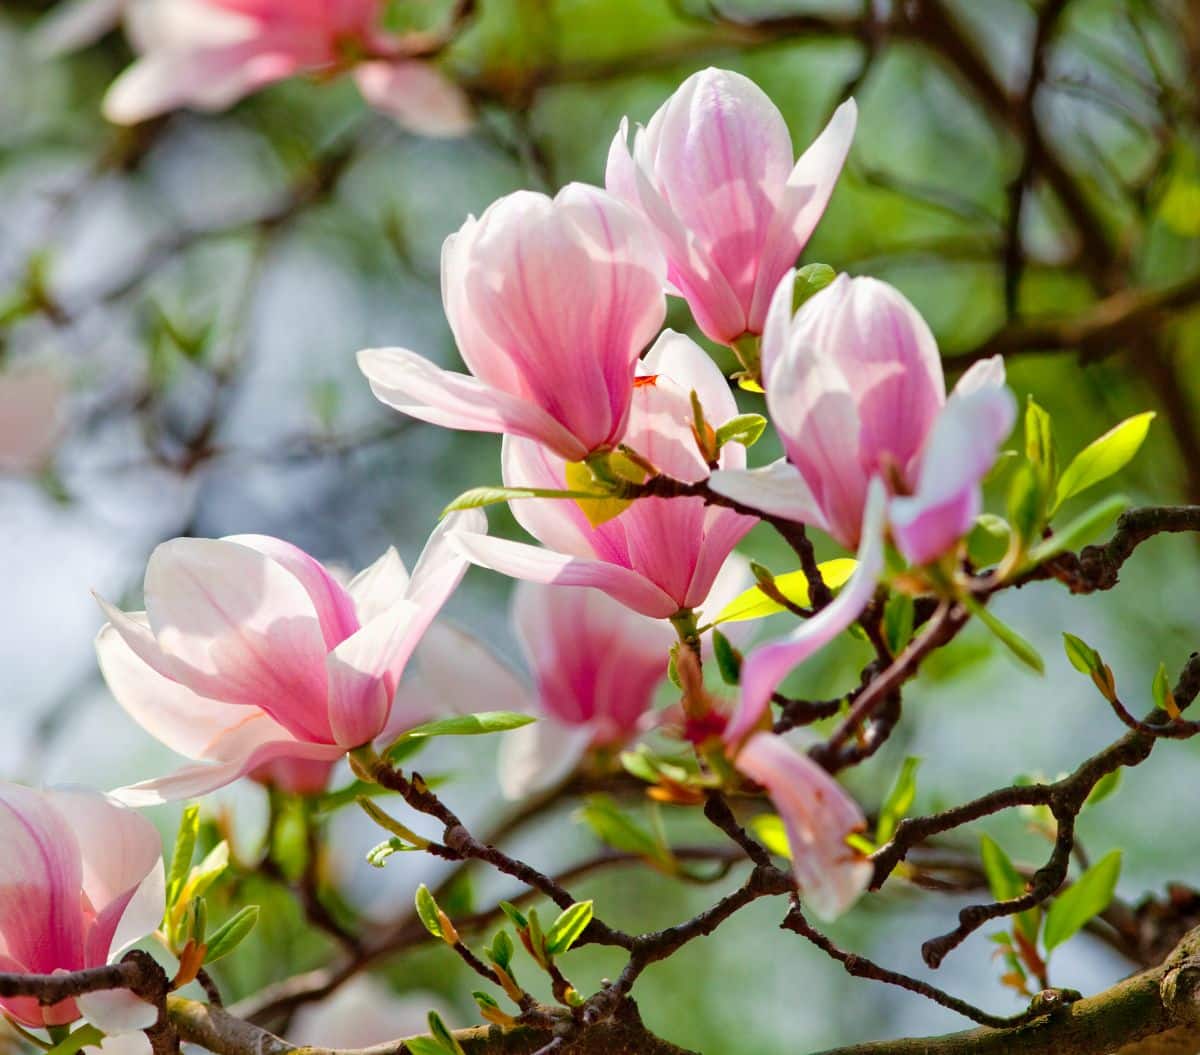 Pink-white flowers of a Magnolia shrub on a sunny day,